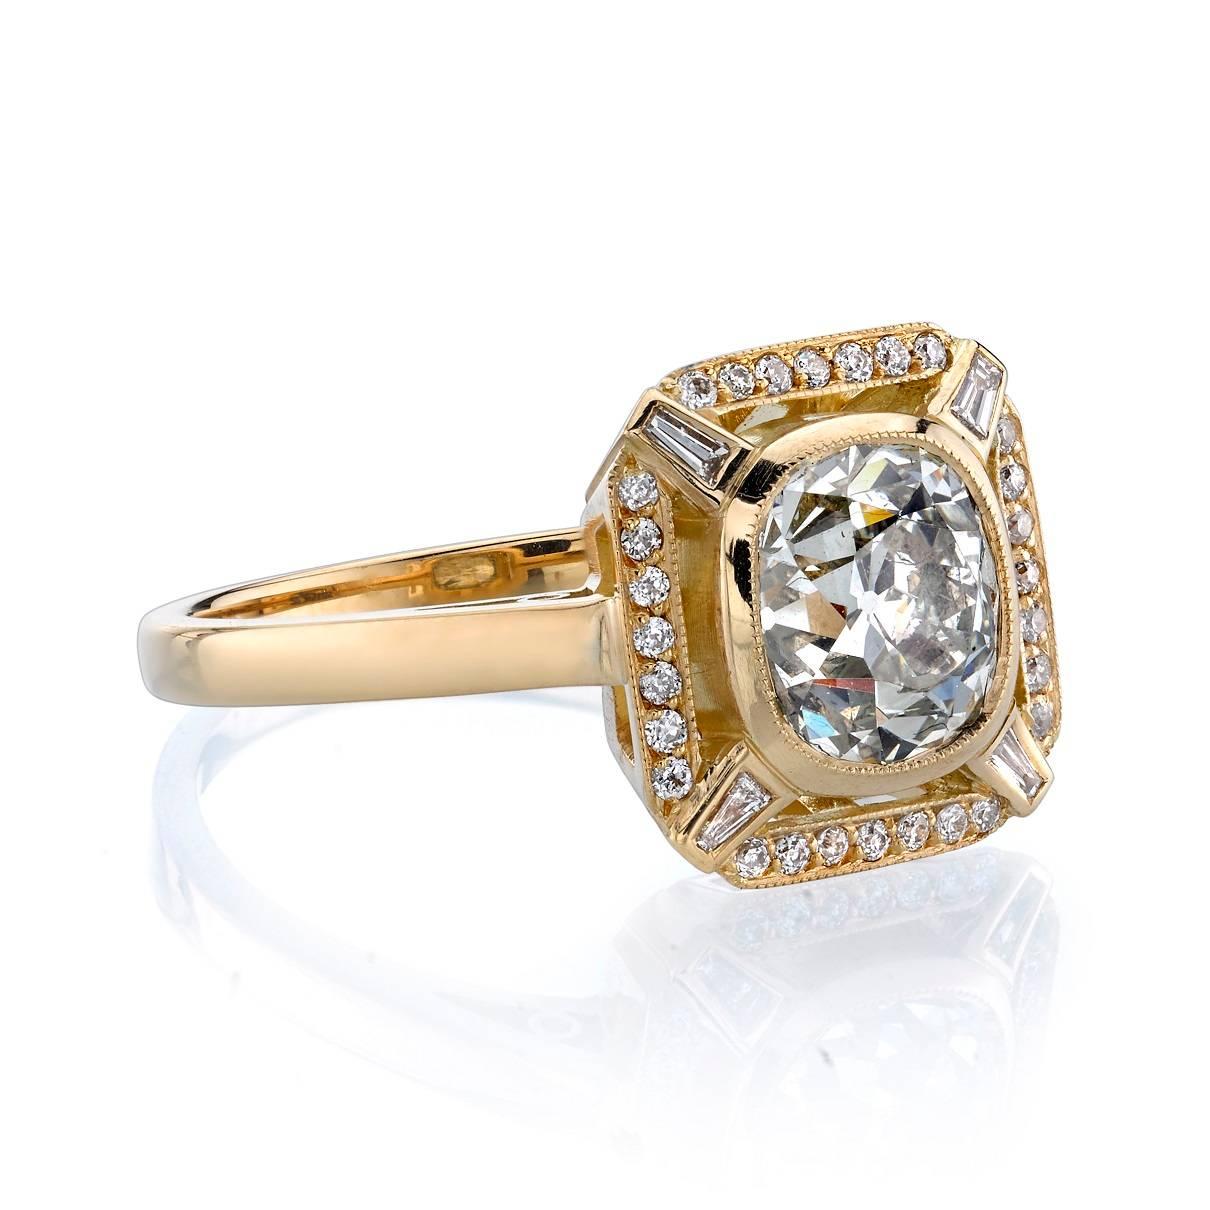 1.82ct J/SI2 Cushion cut diamond EGL certified and set in a handcrafted 18k yellow gold mounting.  This luxe ring gives a fresh and modern take on the diamond surround.